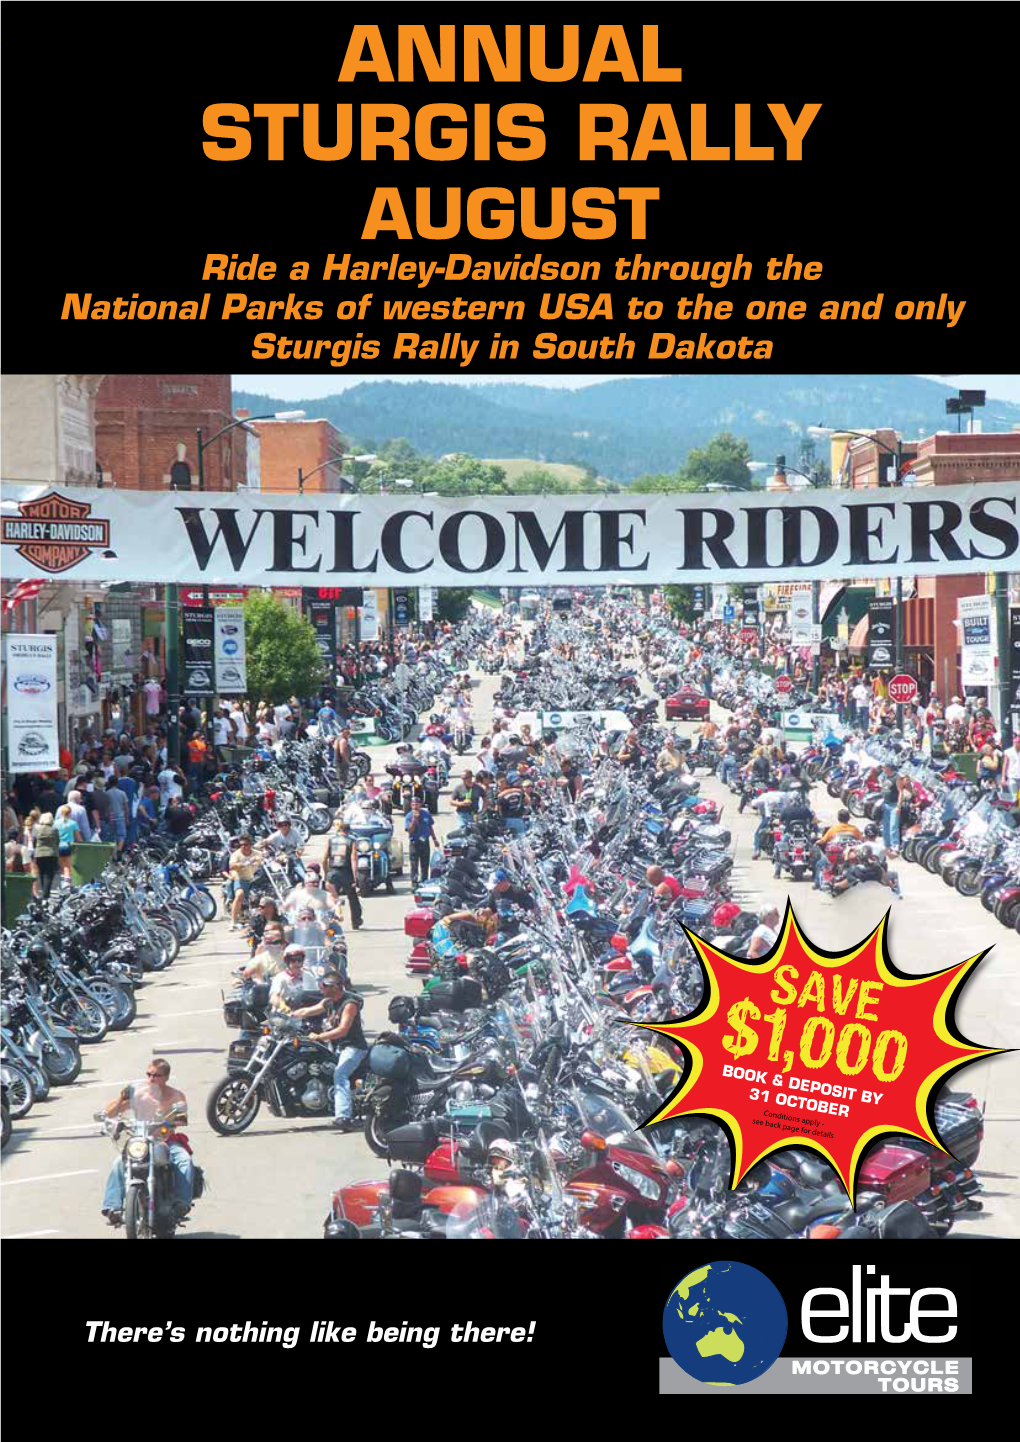 ANNUAL STURGIS RALLY AUGUST Ride a Harley-Davidson Through the National Parks of Western USA to the One and Only Sturgis Rally in South Dakota